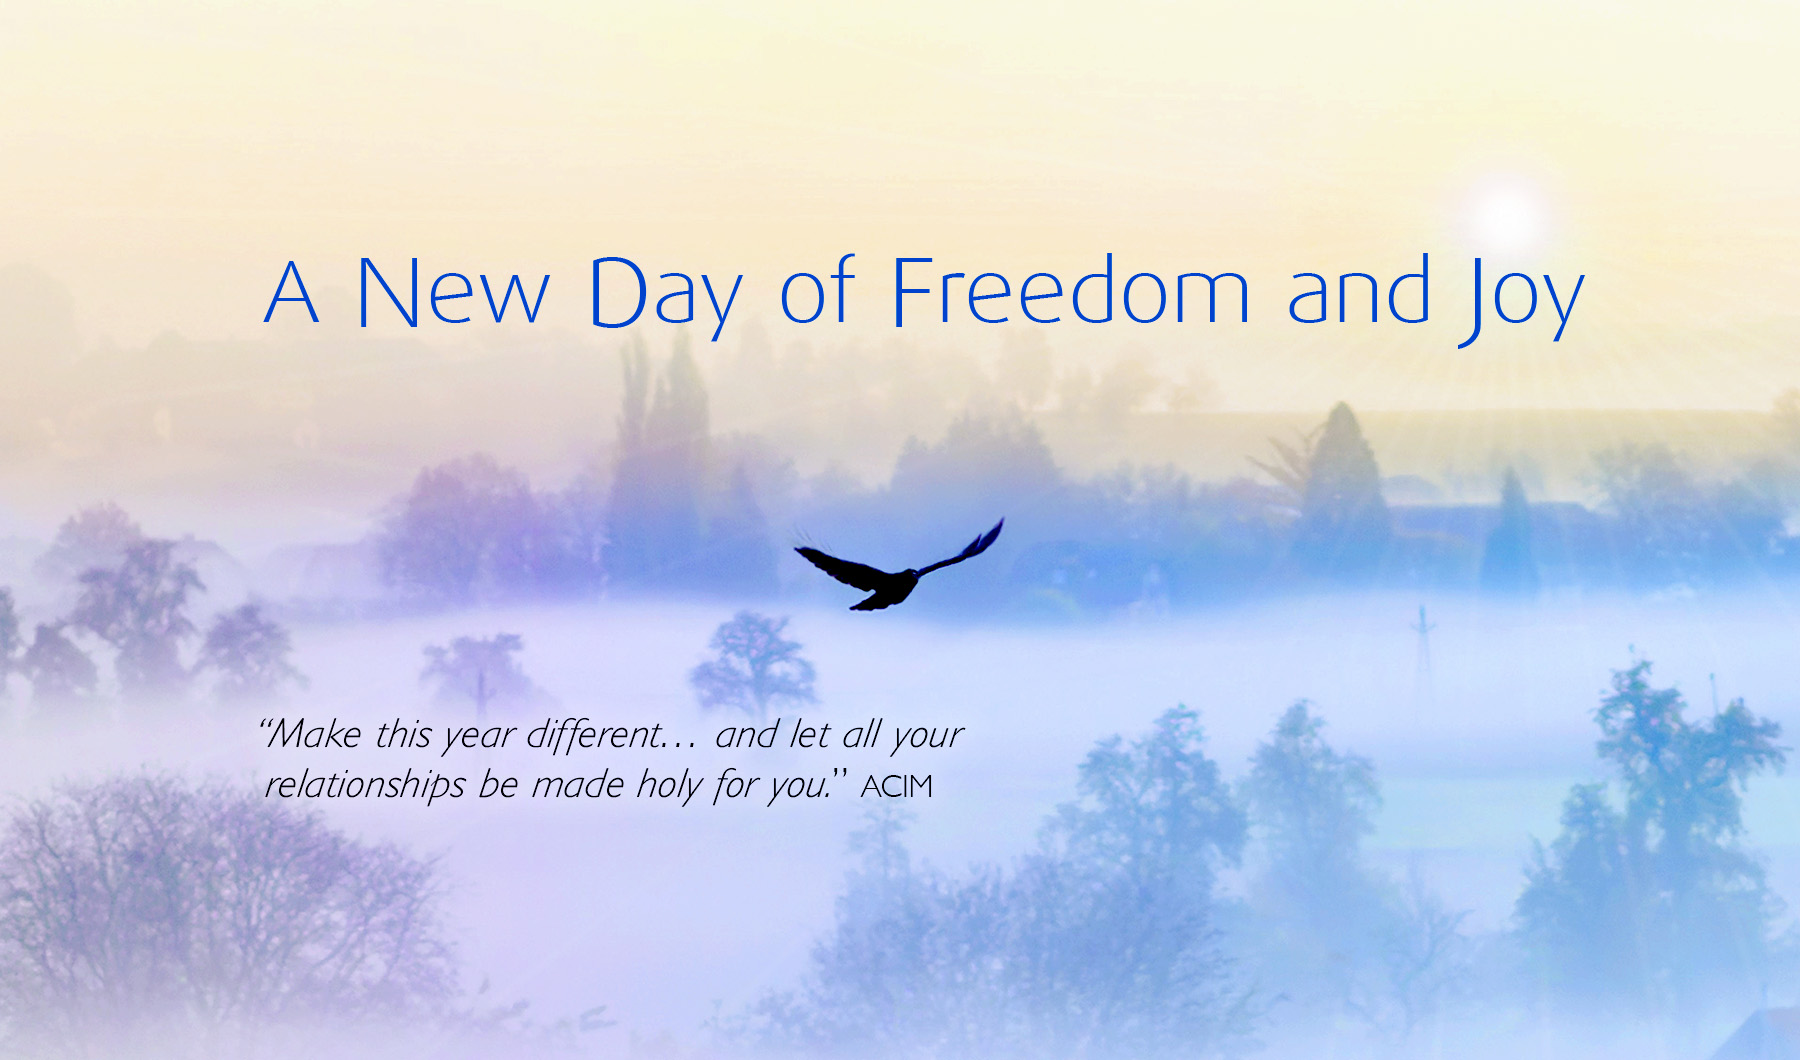 A new day of freedom and joy